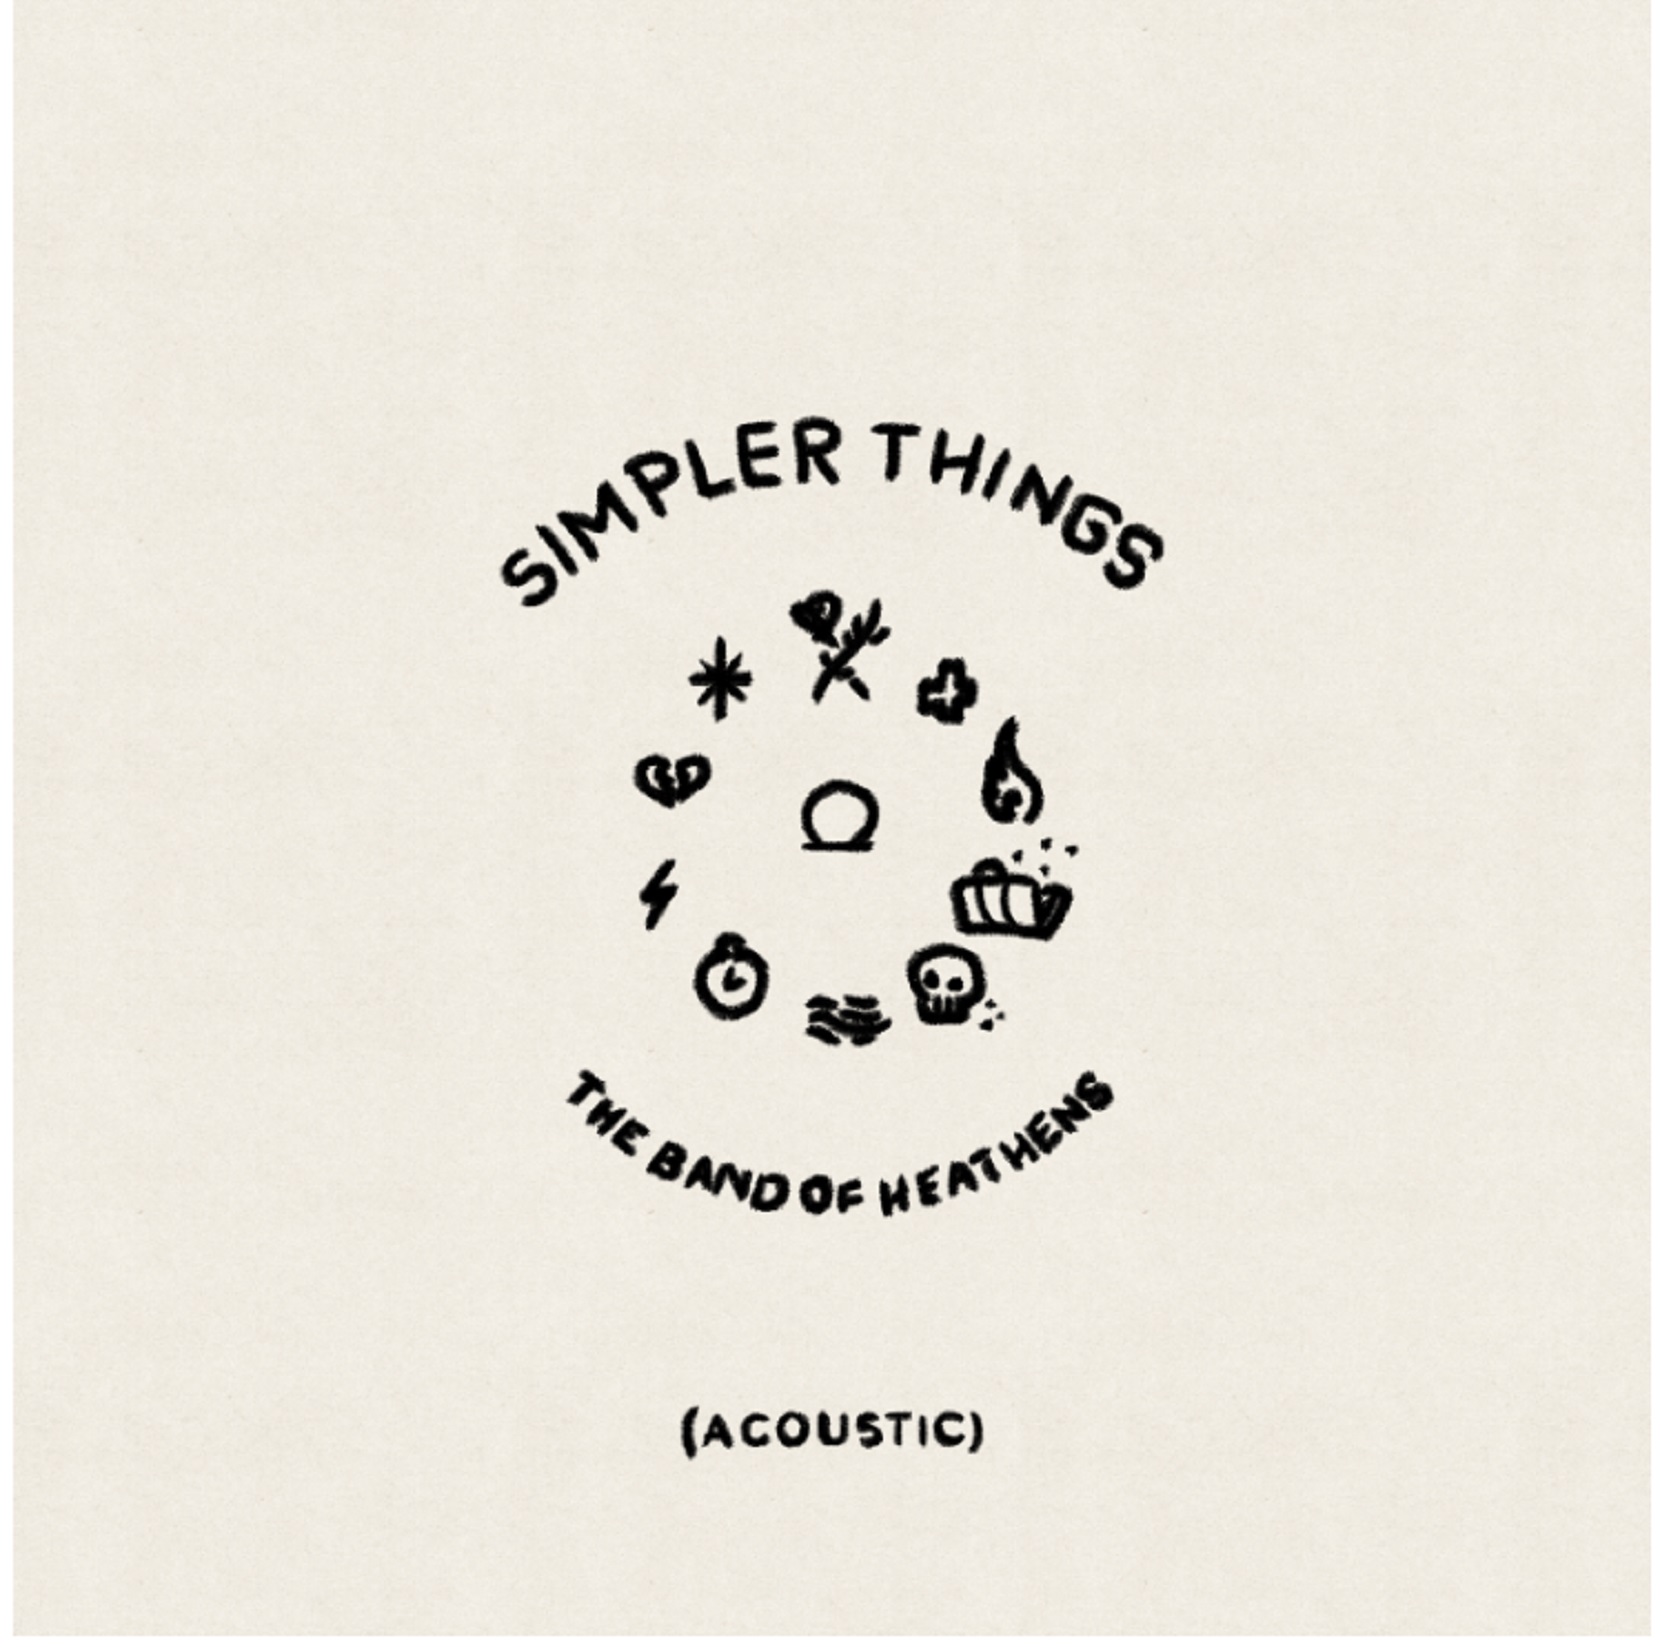 THE BAND OF HEATHENS ANNOUNCE SIMPLER THINGS A STRIPPED DOWN ACOUSTIC VERSION OF THEIR CRITICALLY ACCLAIMED ALBUM SIMPLE THINGS